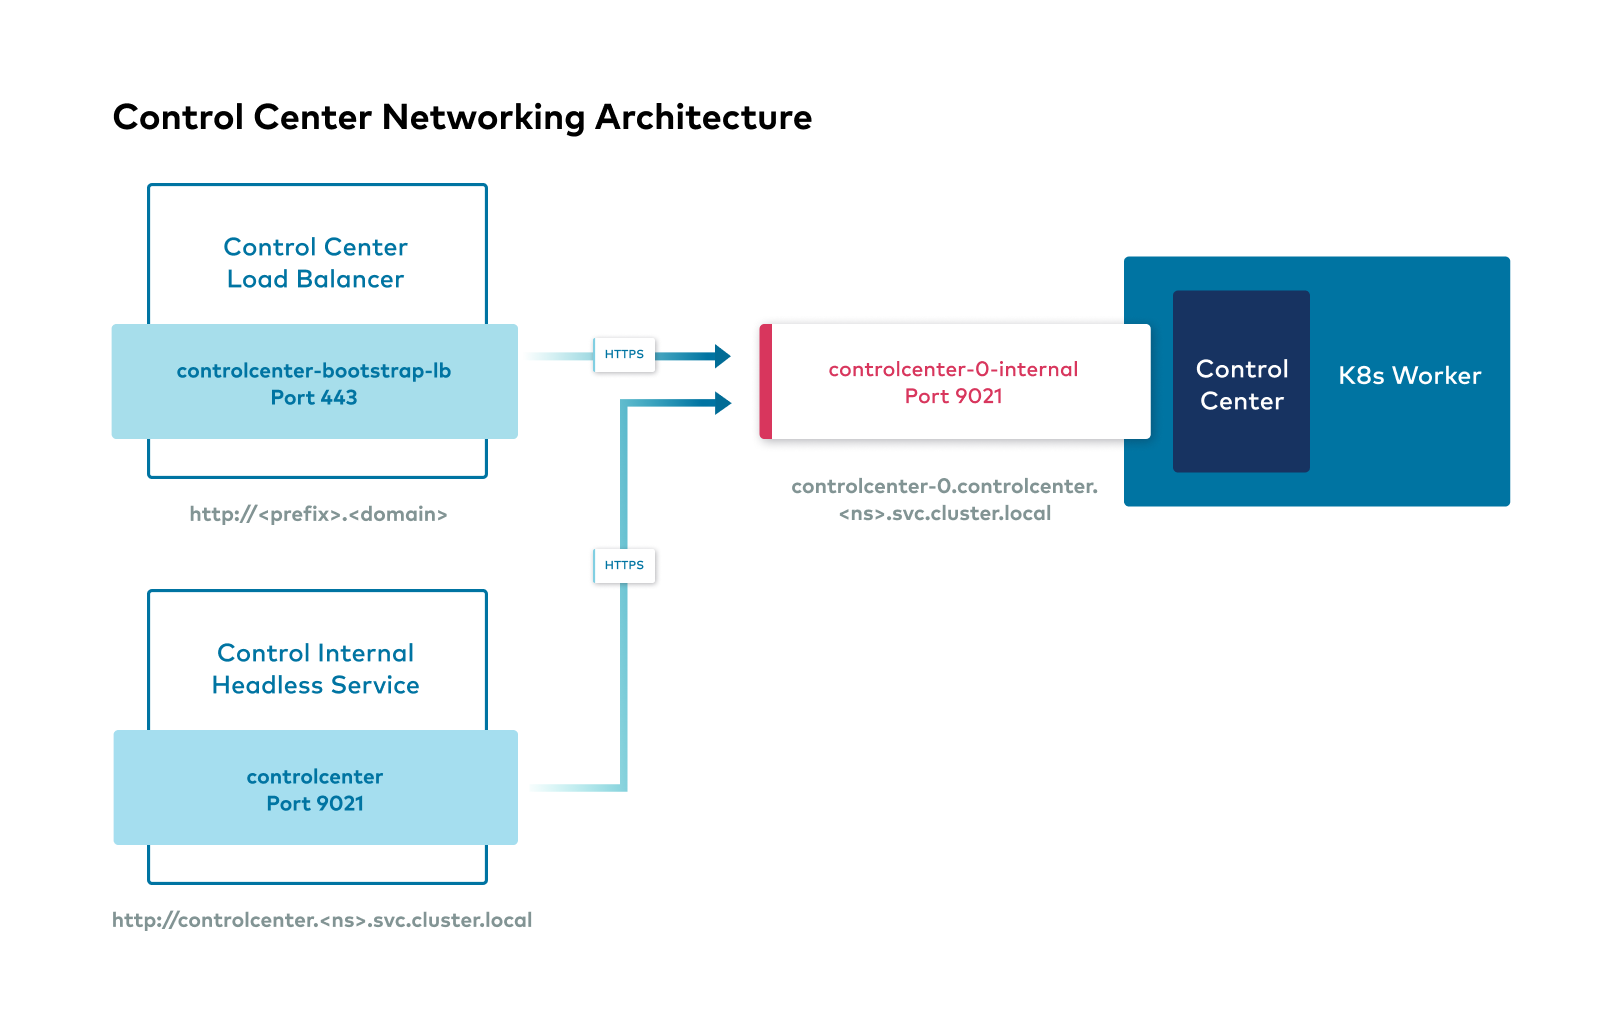 _images/20210428-Control_Center_Networking_Architecture.png